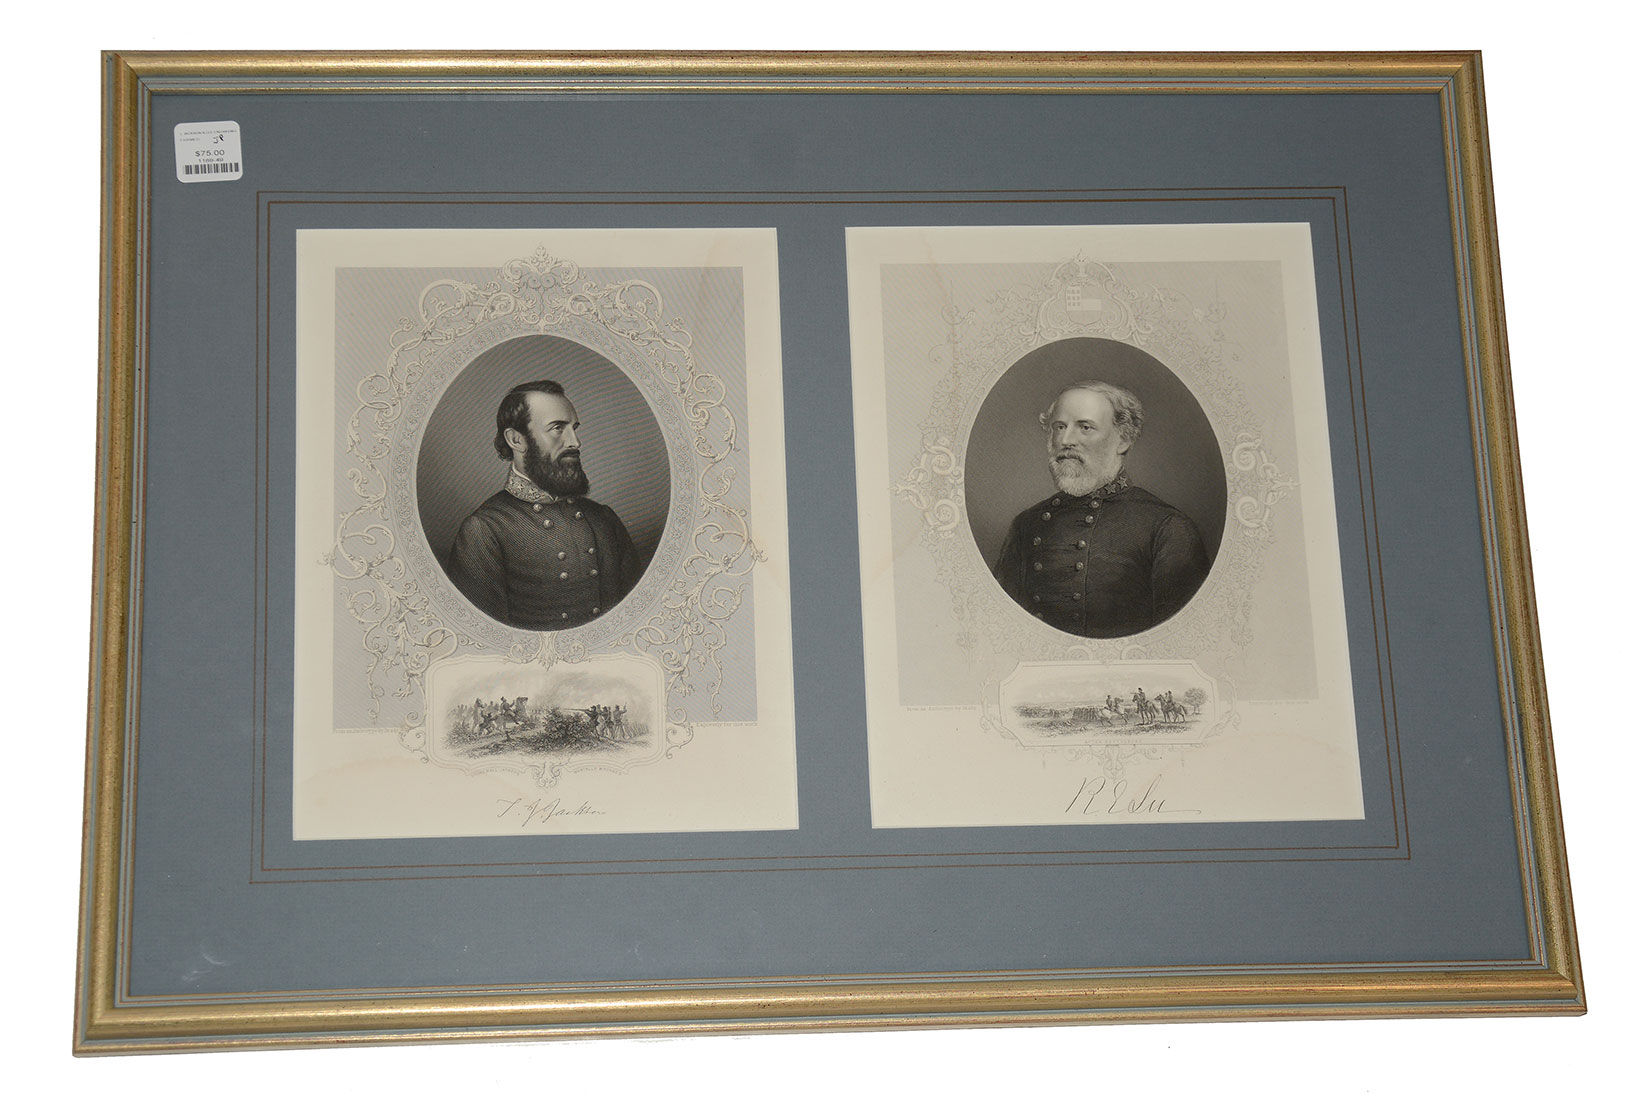 PAIR OF FRAMED ENGRAVINGS OF CS GENERALS ROBERT E. LEE AND STONEWALL JACKSON 